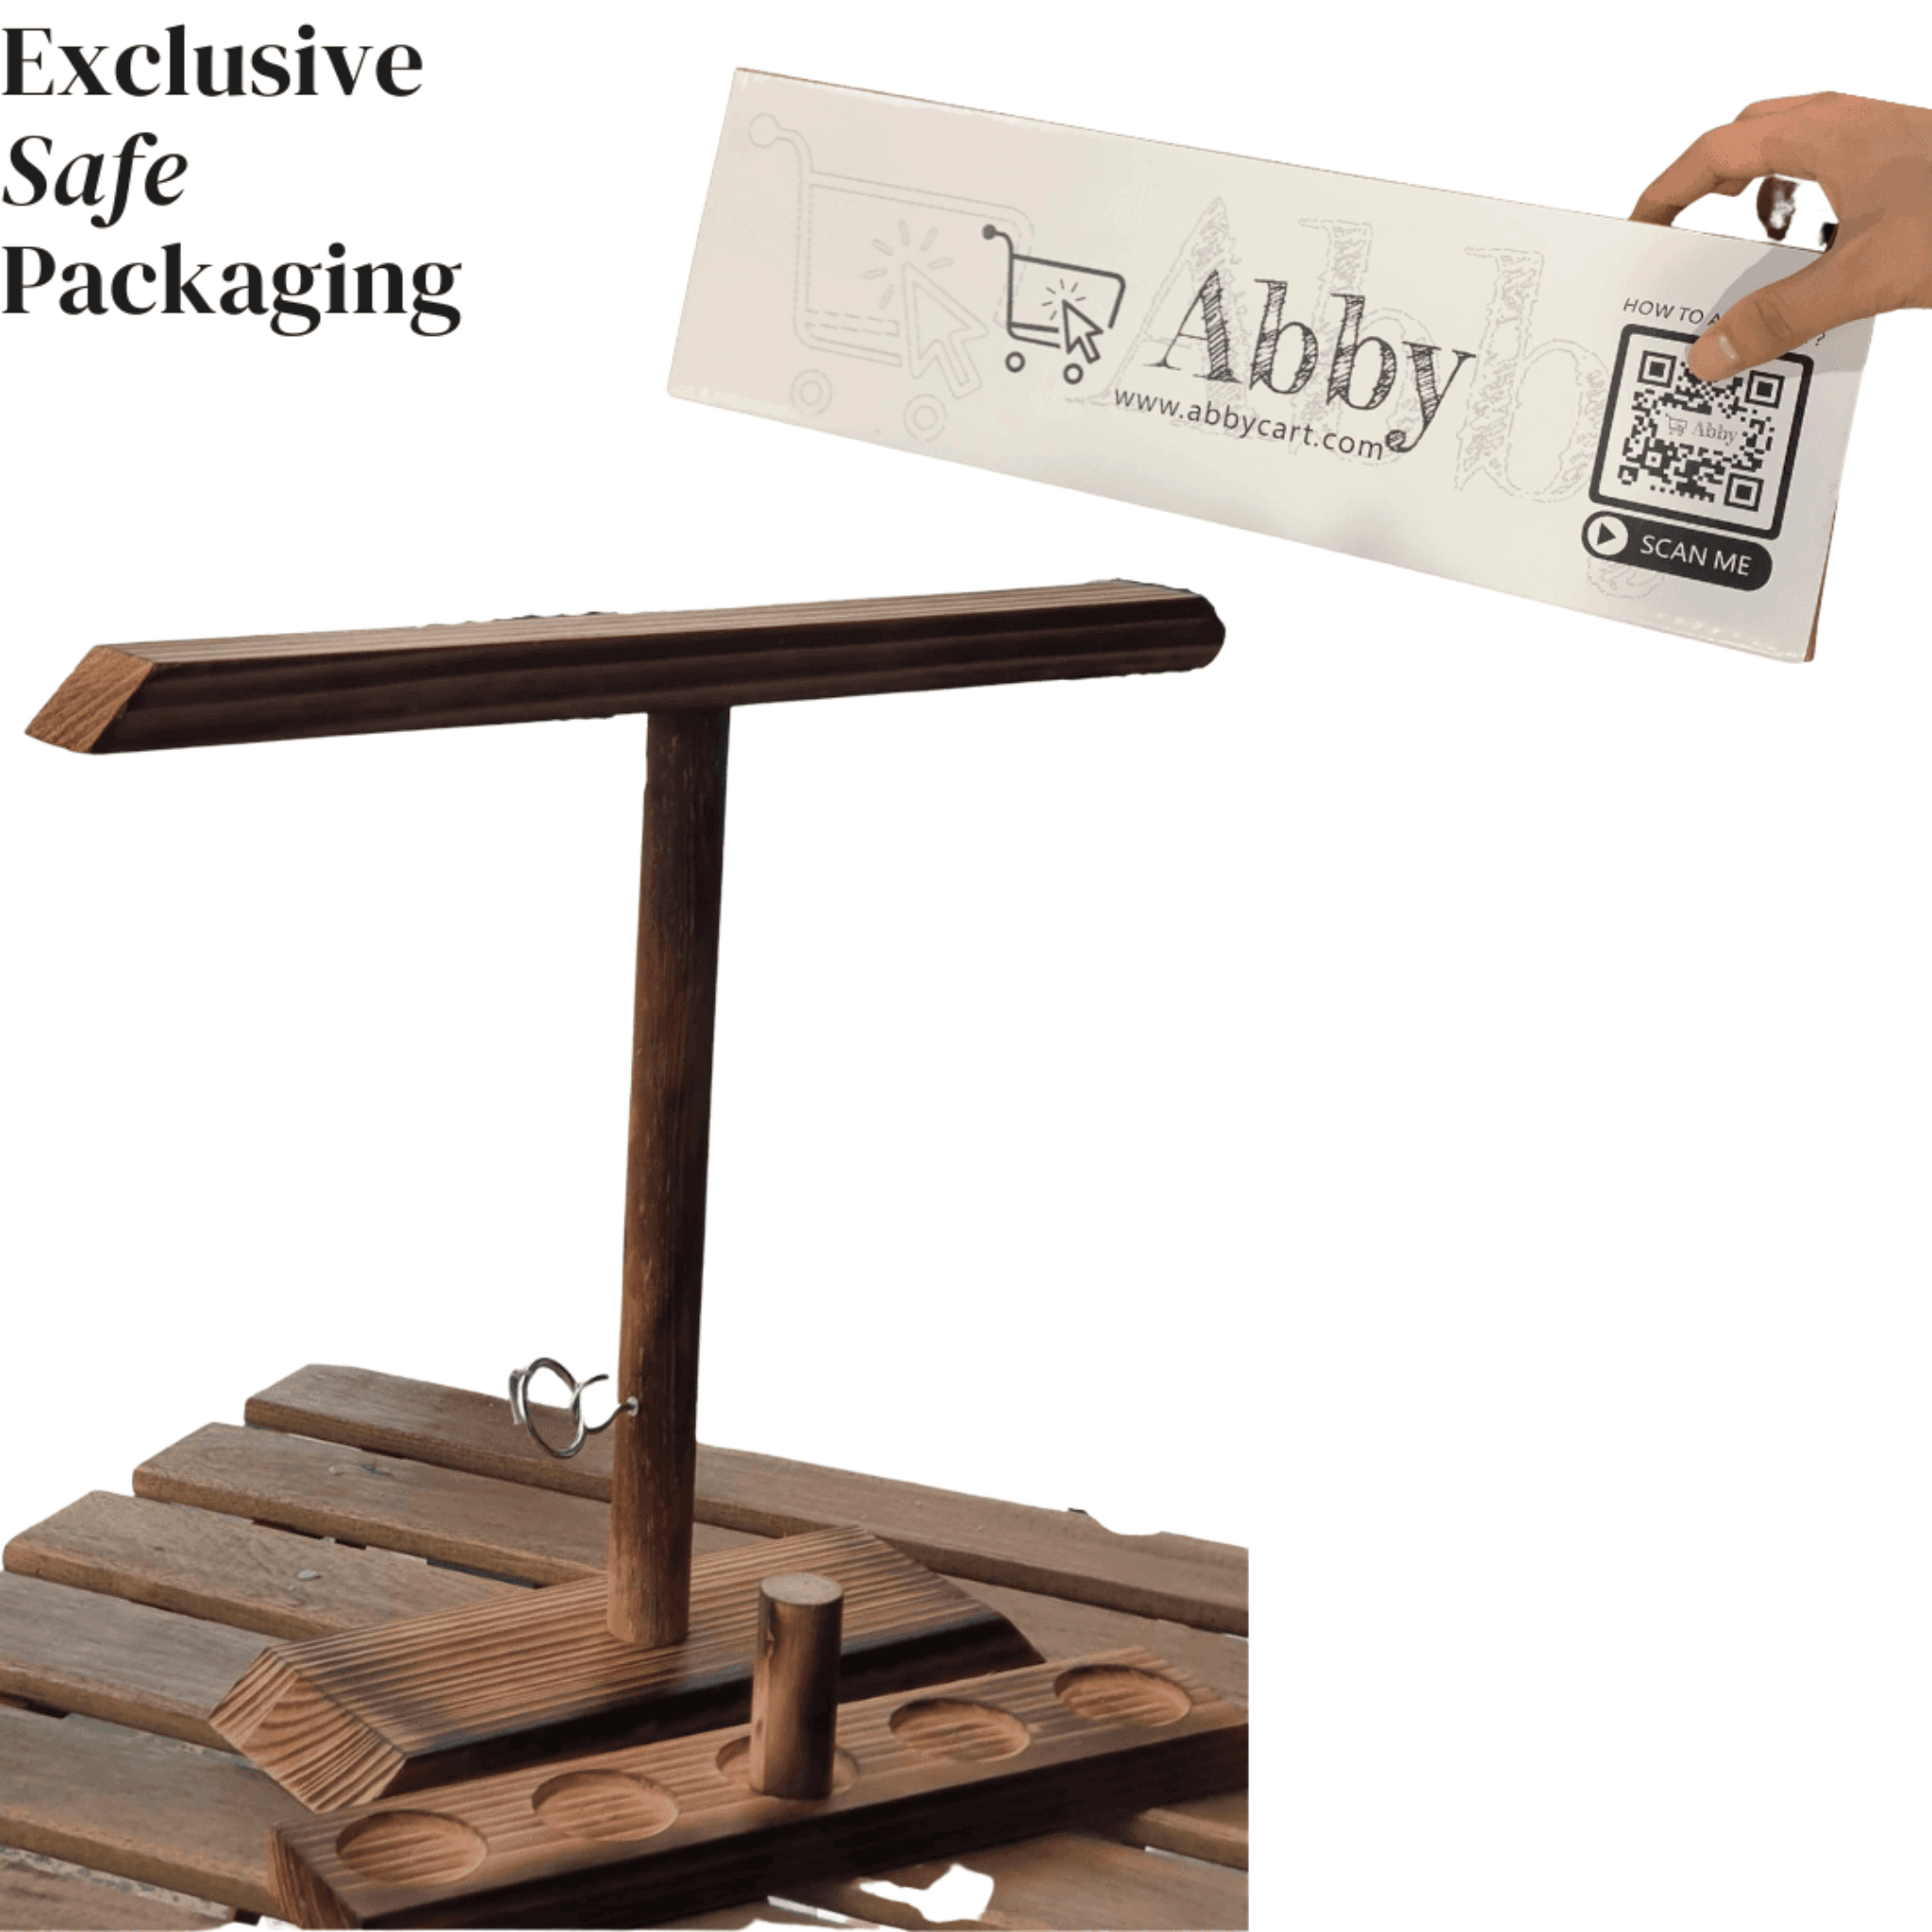 Abby™ Handmade Wooden Ring Toss with Shot Ladder - Party Bar Game - Abbycart